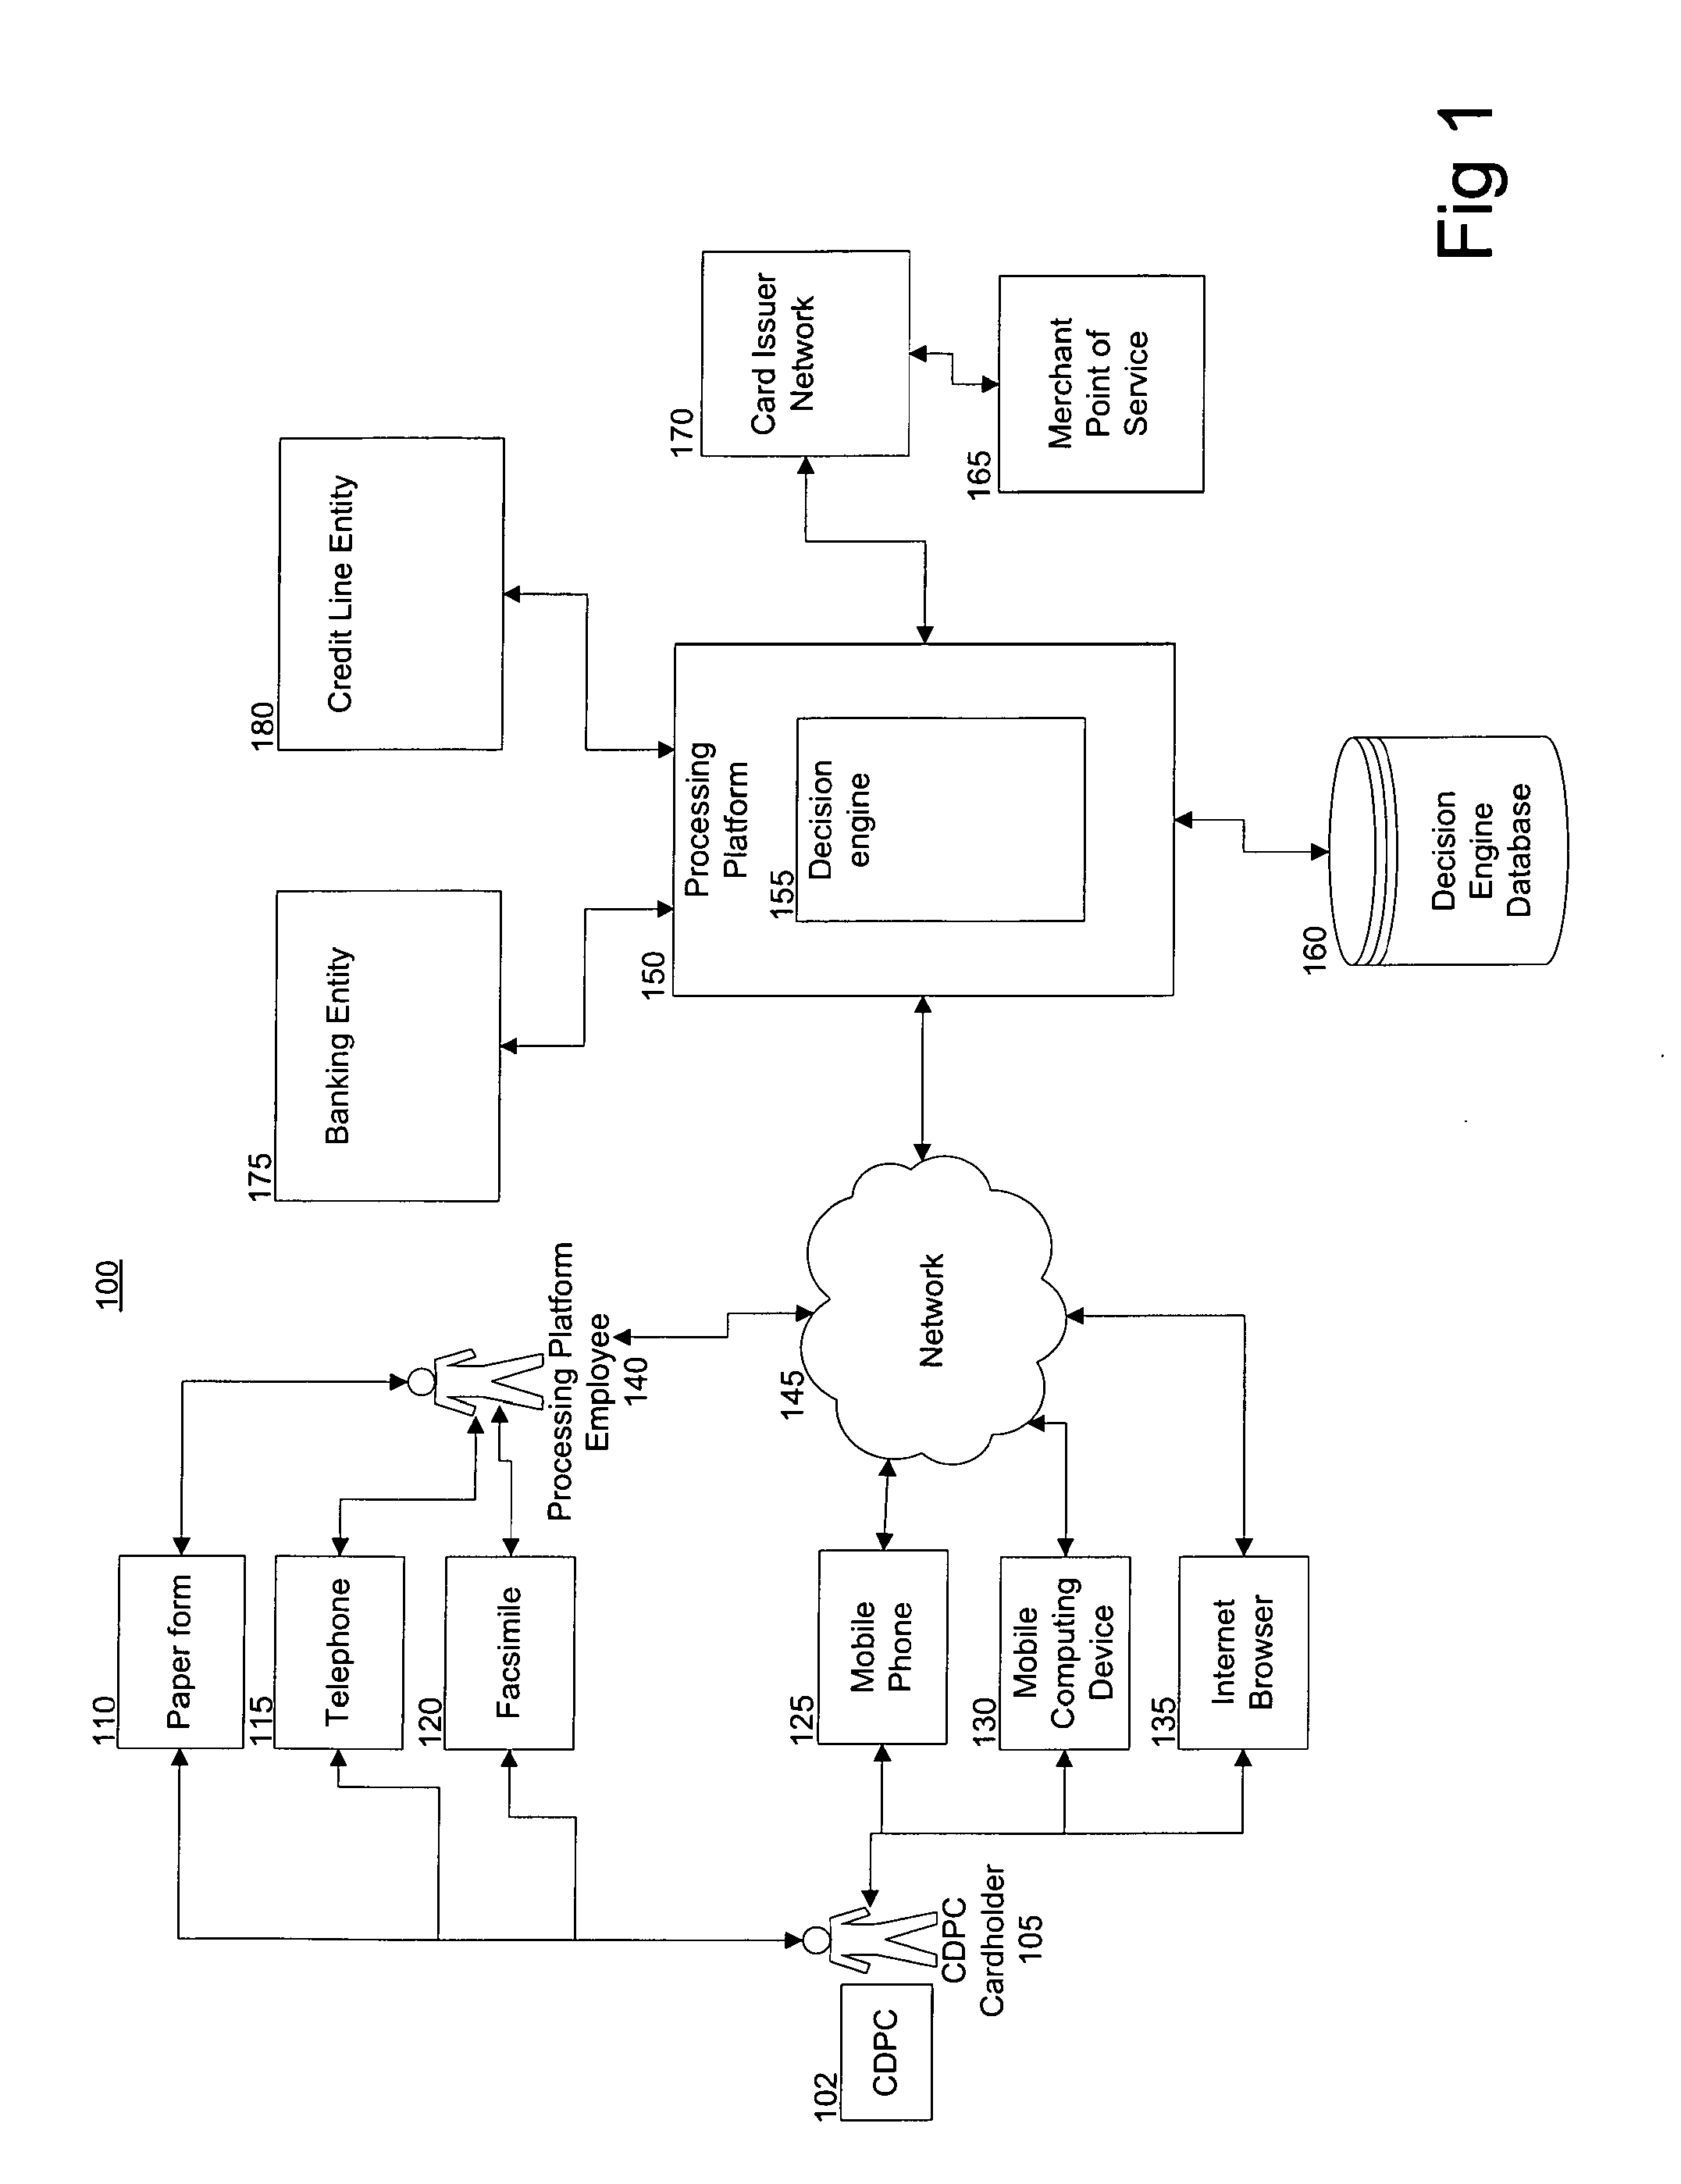 System and method for providing consumer directed payment card